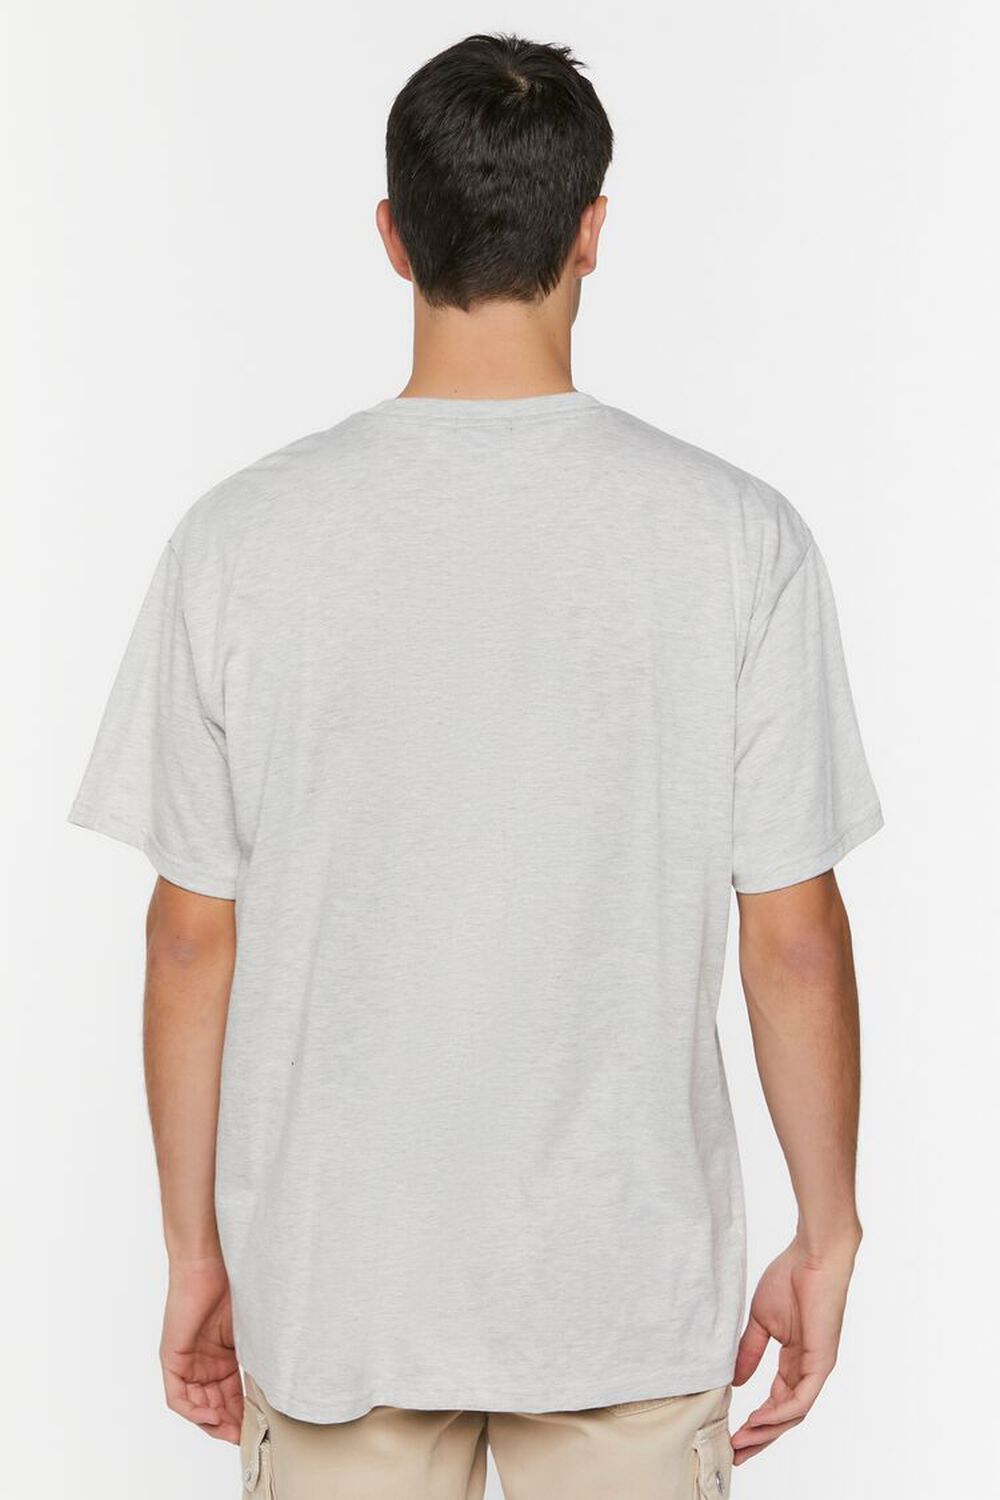 HEATHER GREY/BLACK Embroidered Float Above Tee, image 3